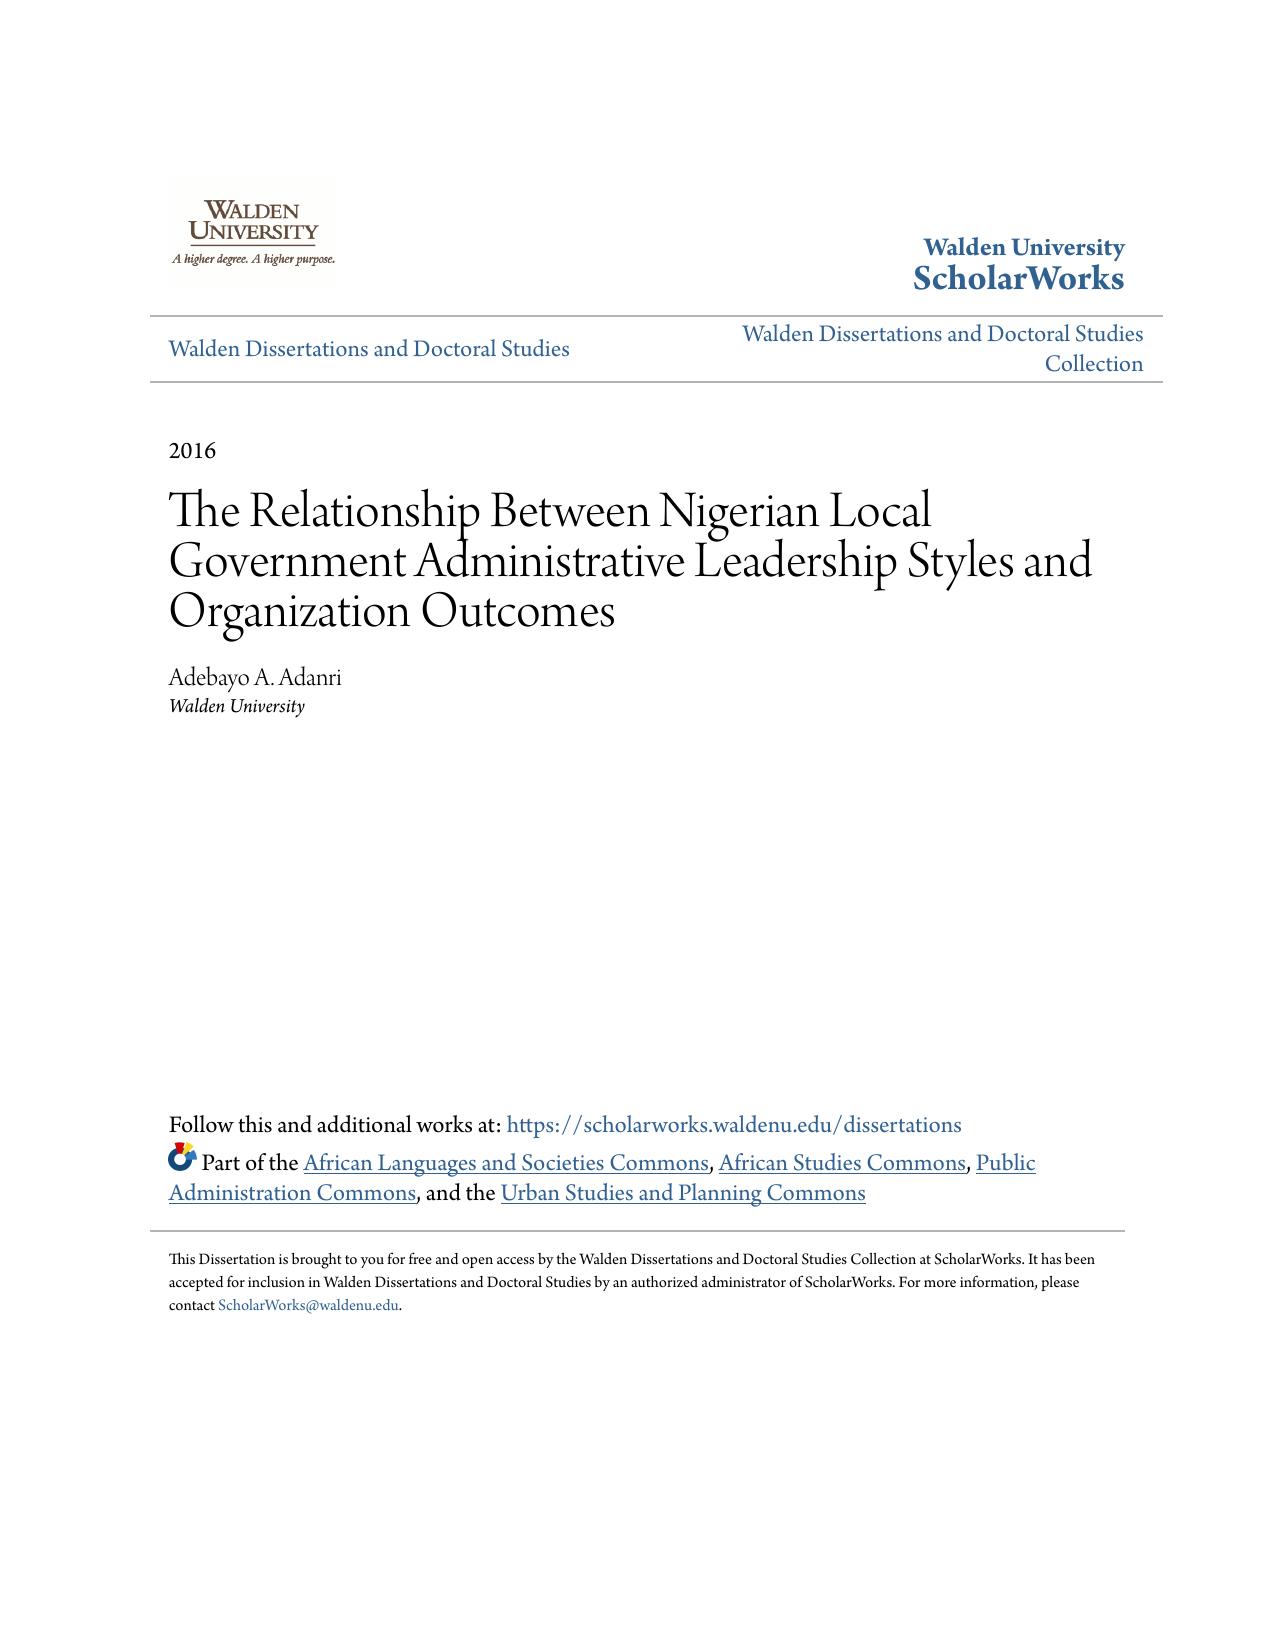 The Relationship Between Nigerian Local Government Administrative Leadership Styles and Organization Outcomes